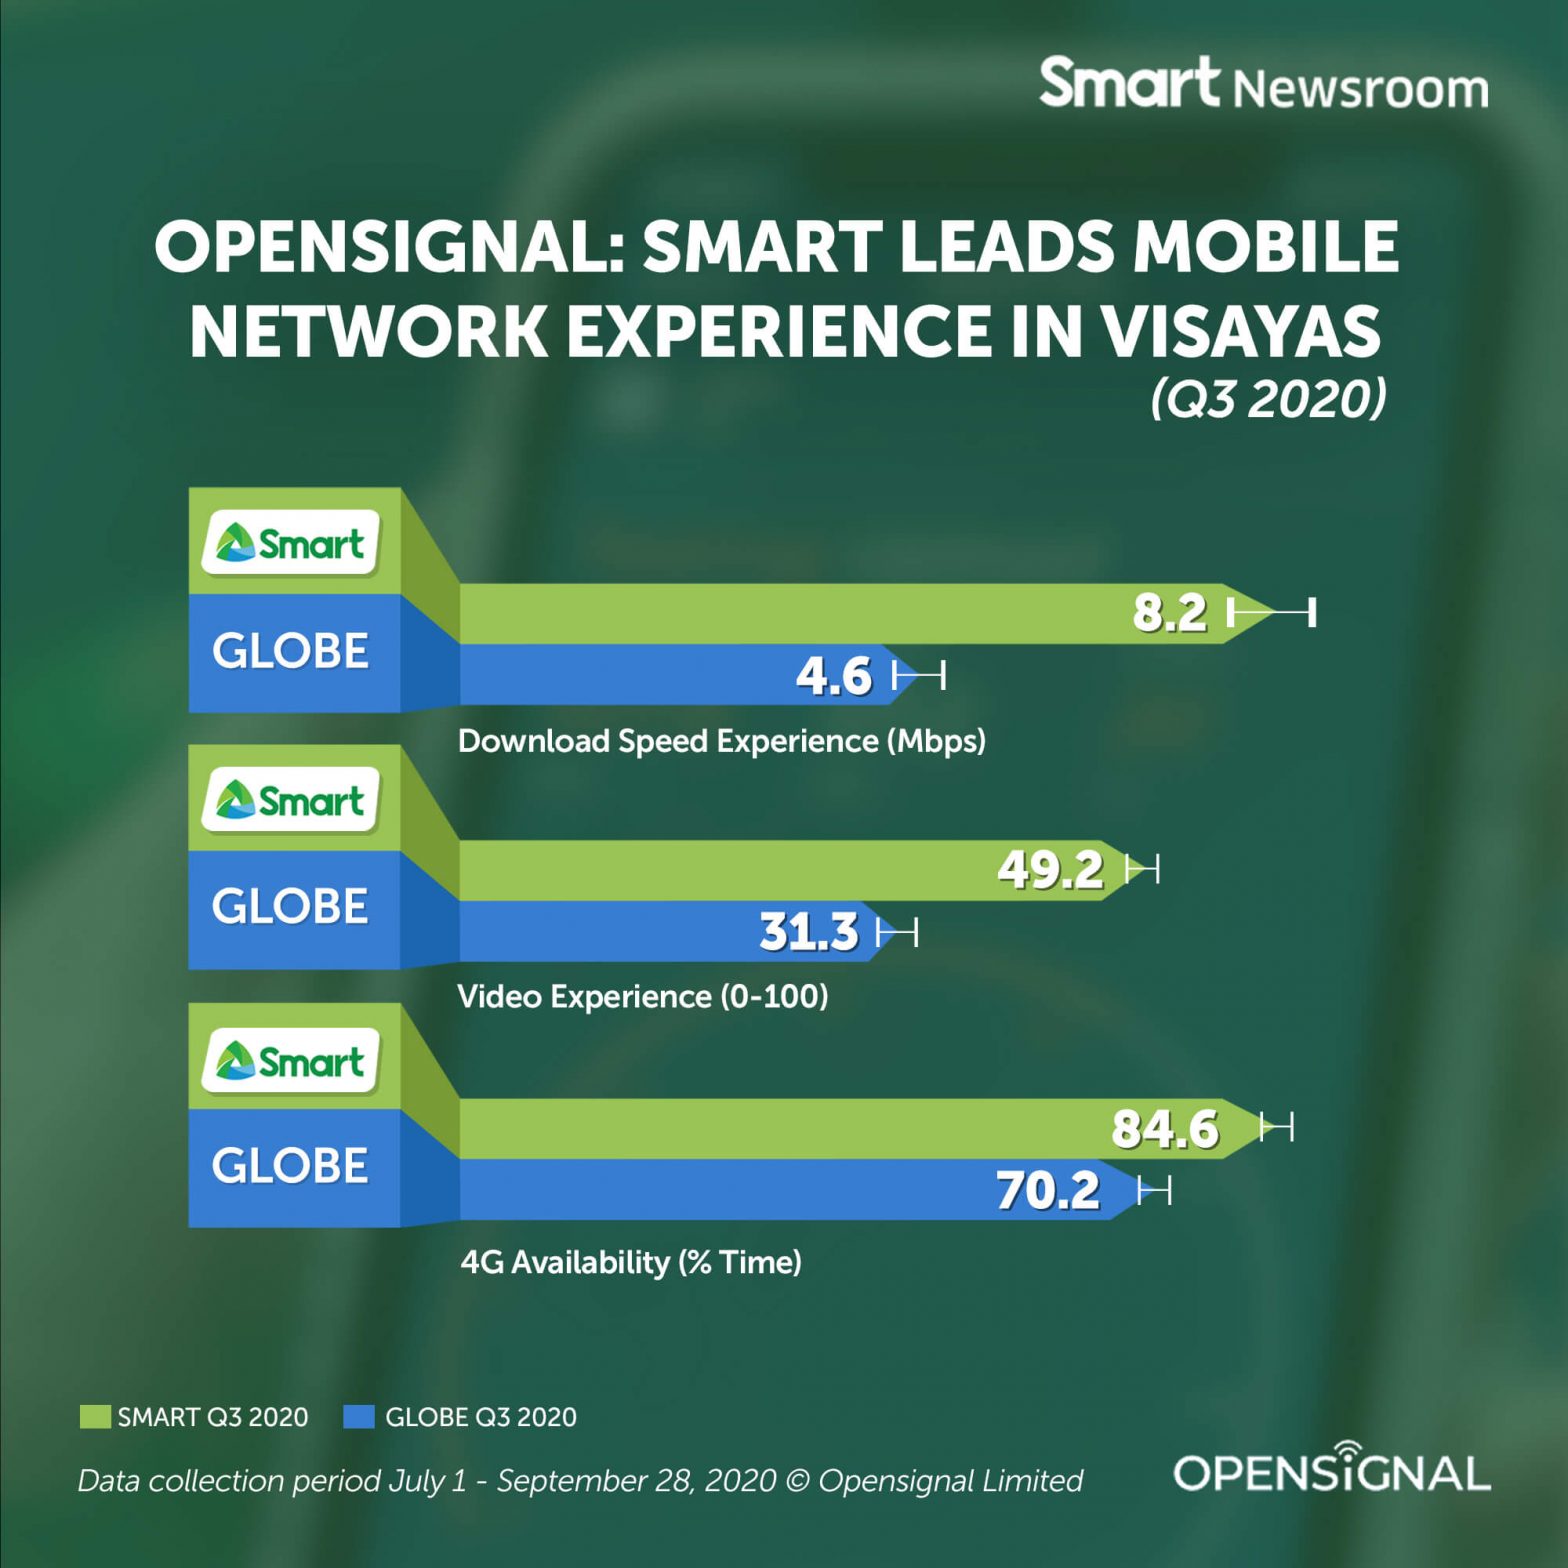 Opensignal: Smart leads in mobile network experience across Visayas